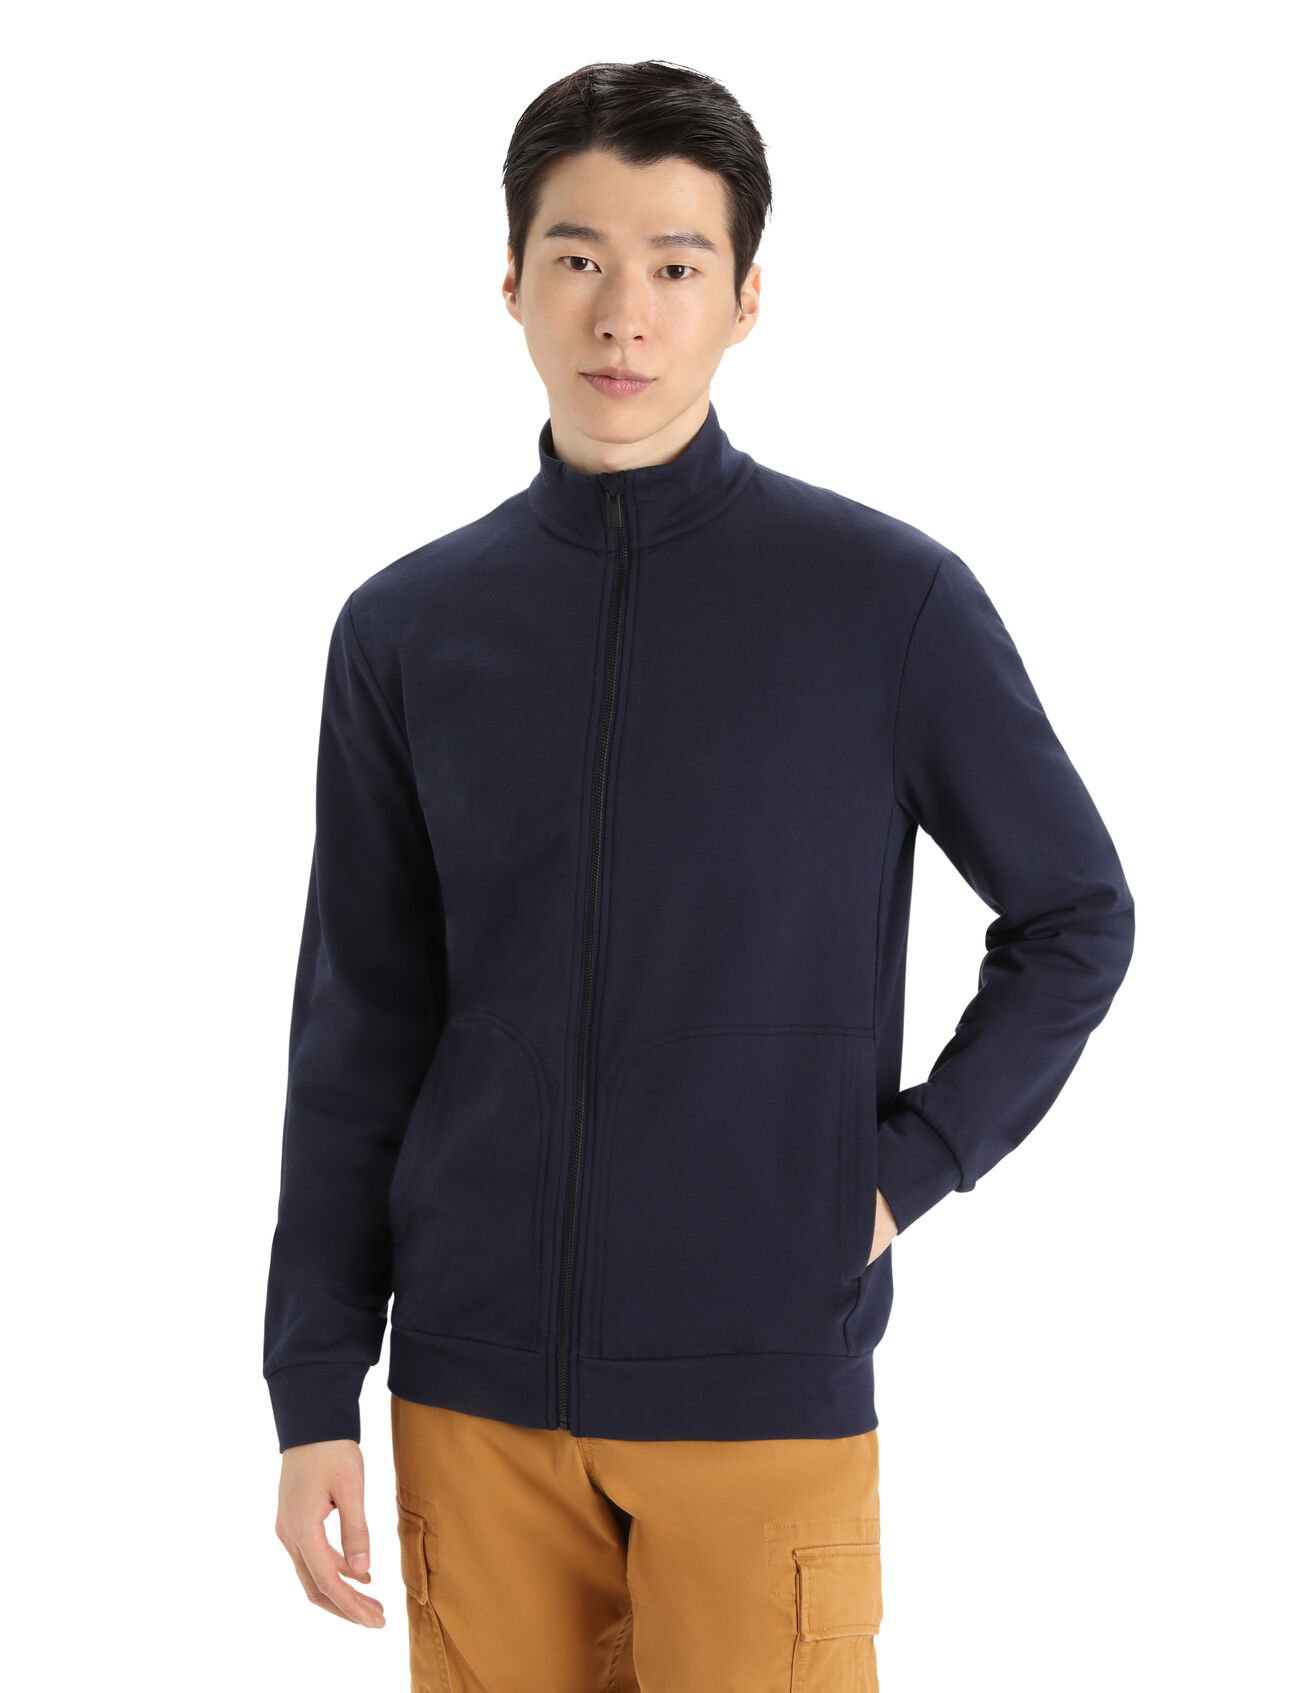 Mens Merino Central II Long Sleeve Zip A versatile, everyday sweatshirt that goes anywhere in comfort, the Central II Long Sleeve Zip features a sustainable blend of natural merino wool and soft organic cotton.